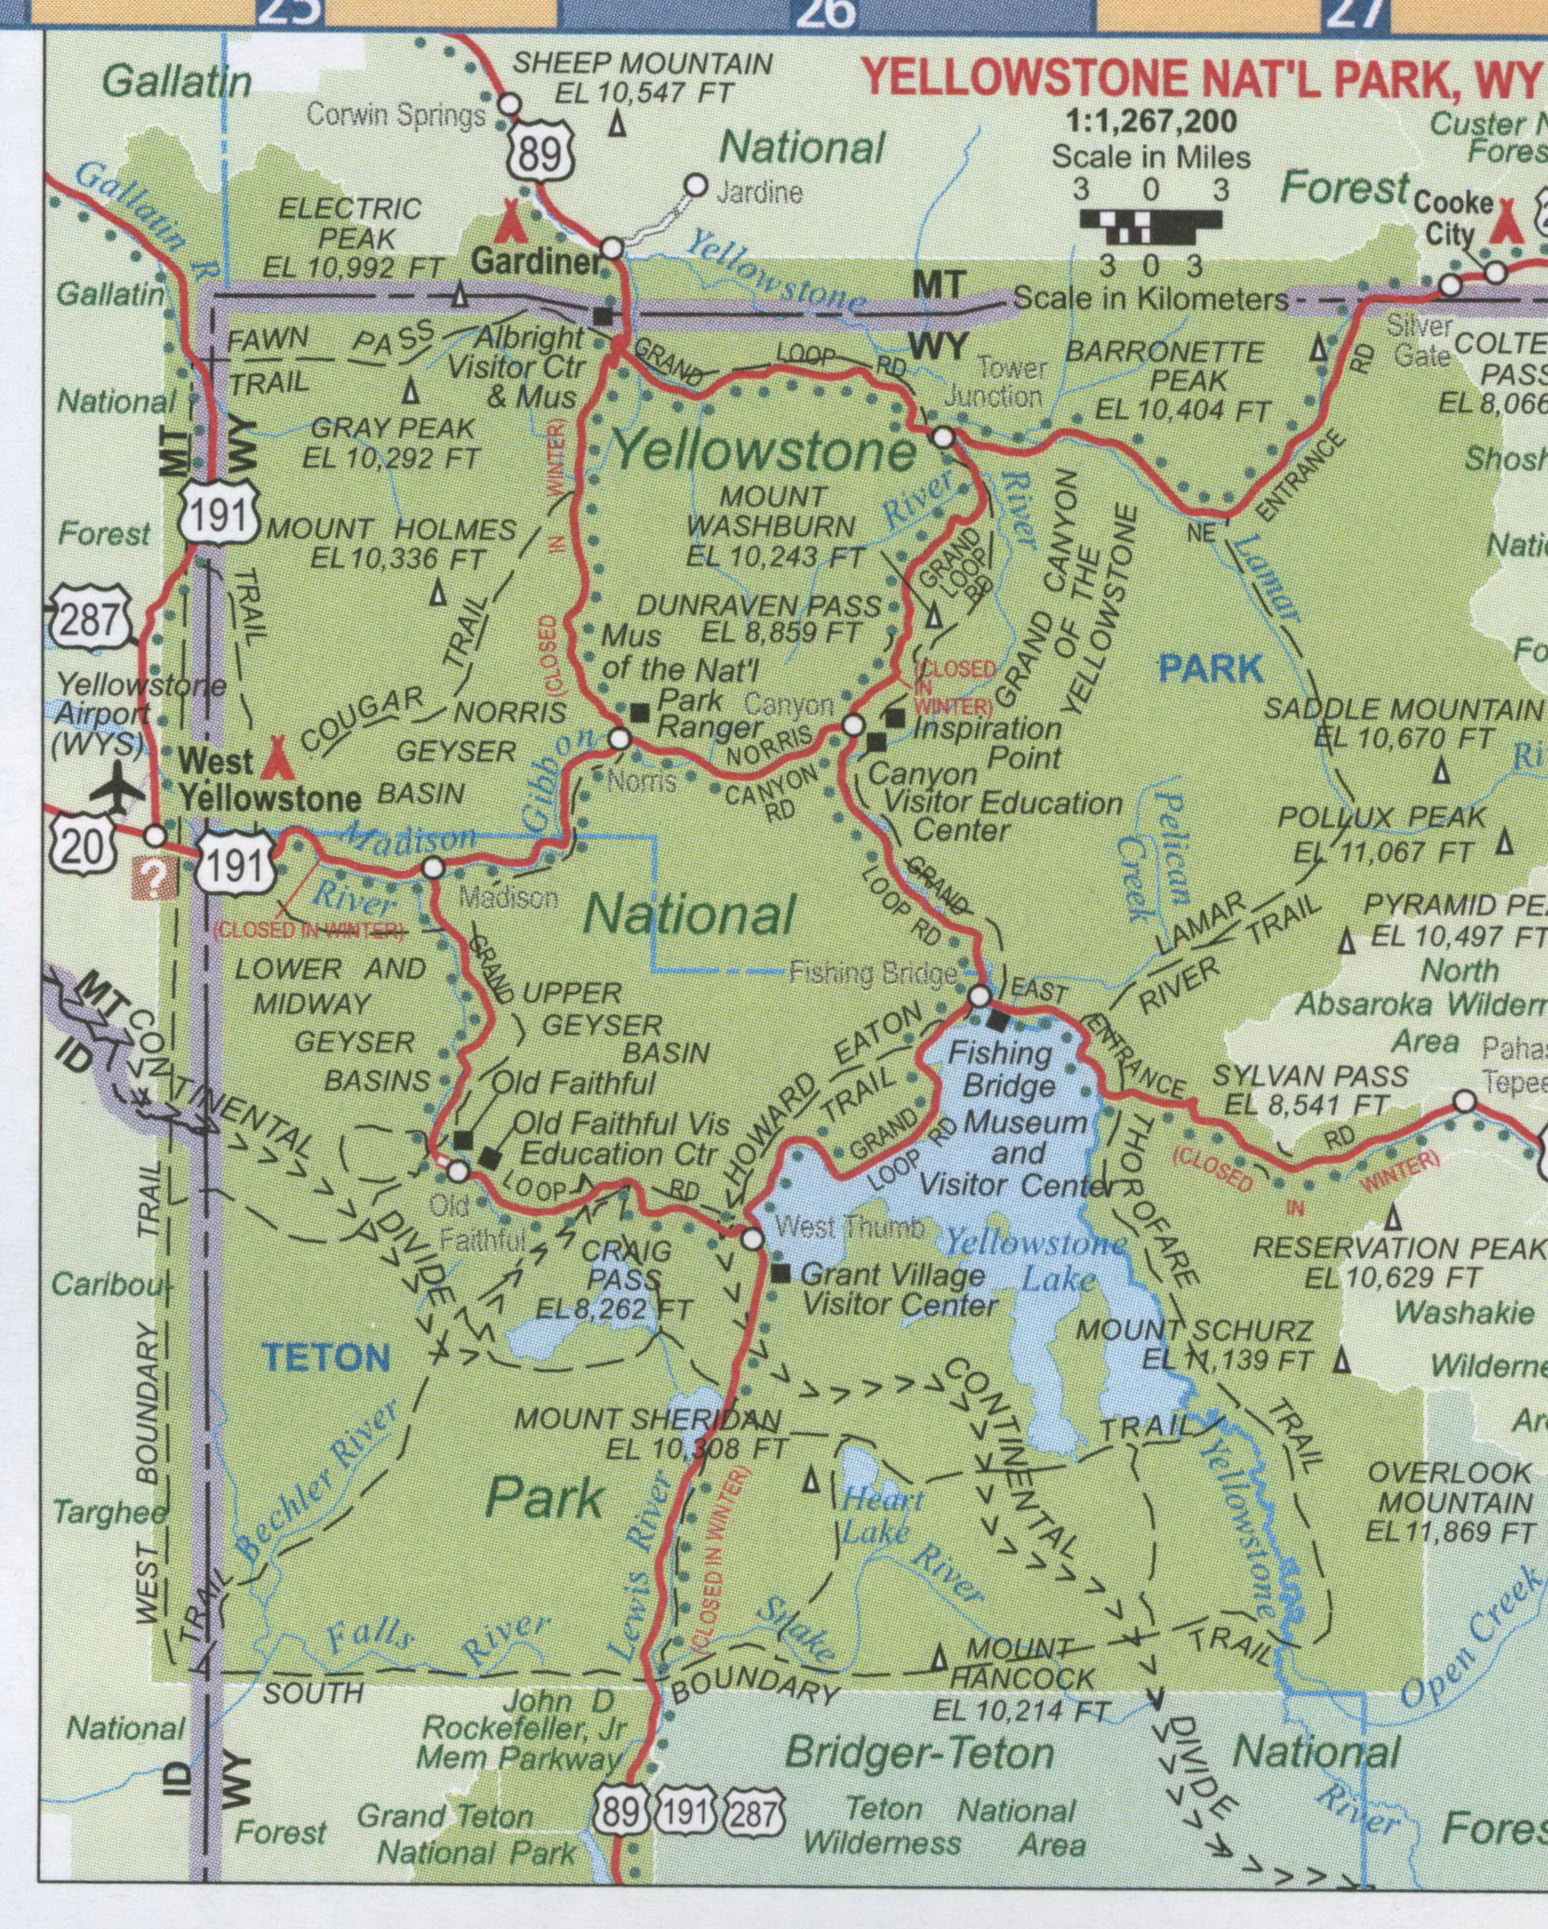 Map of Yellowstone National Park